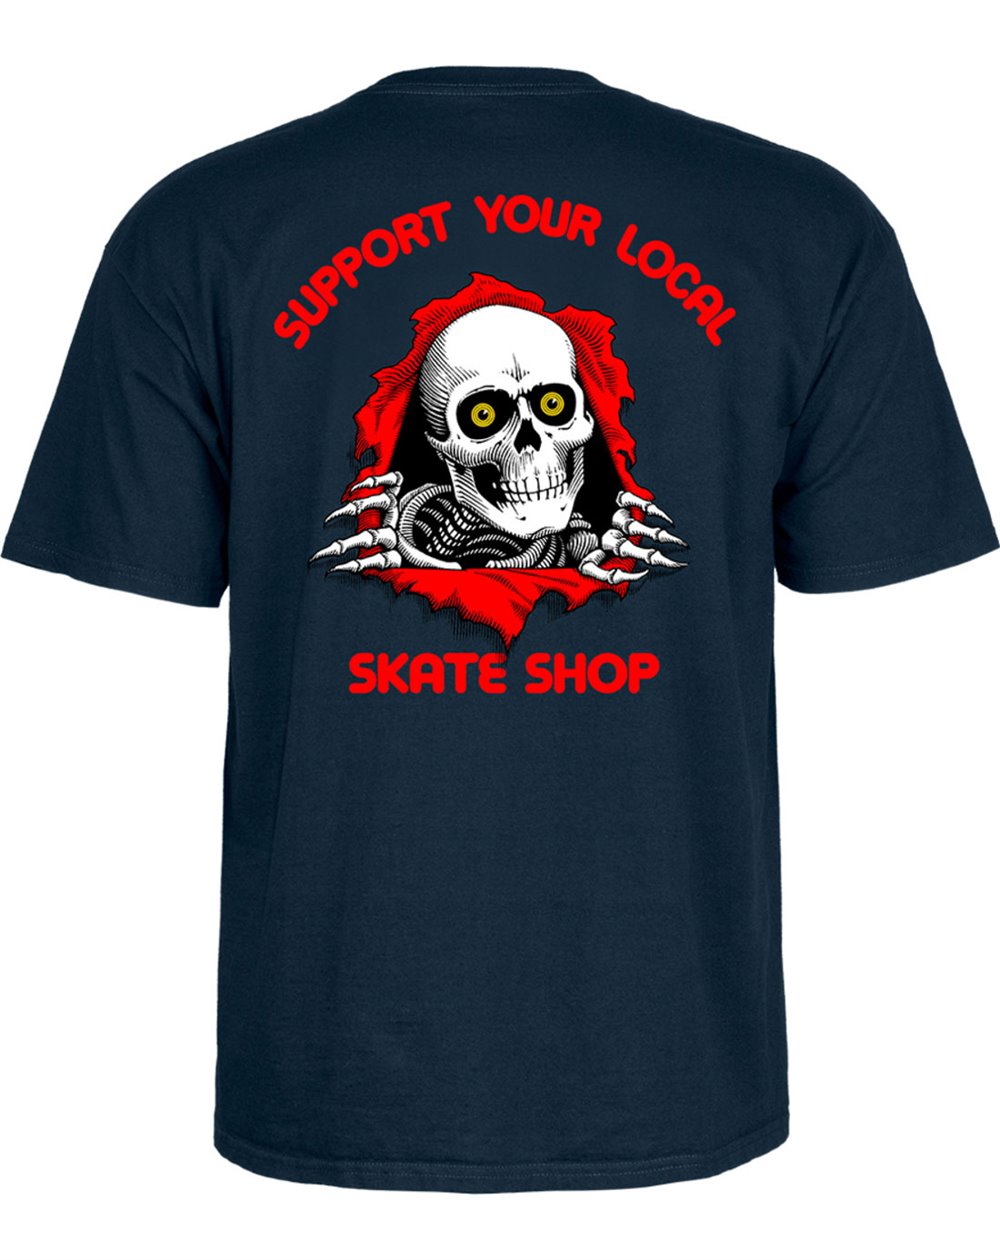 Powell Peralta Men's T-Shirt Support Your Local Skate Shop Navy